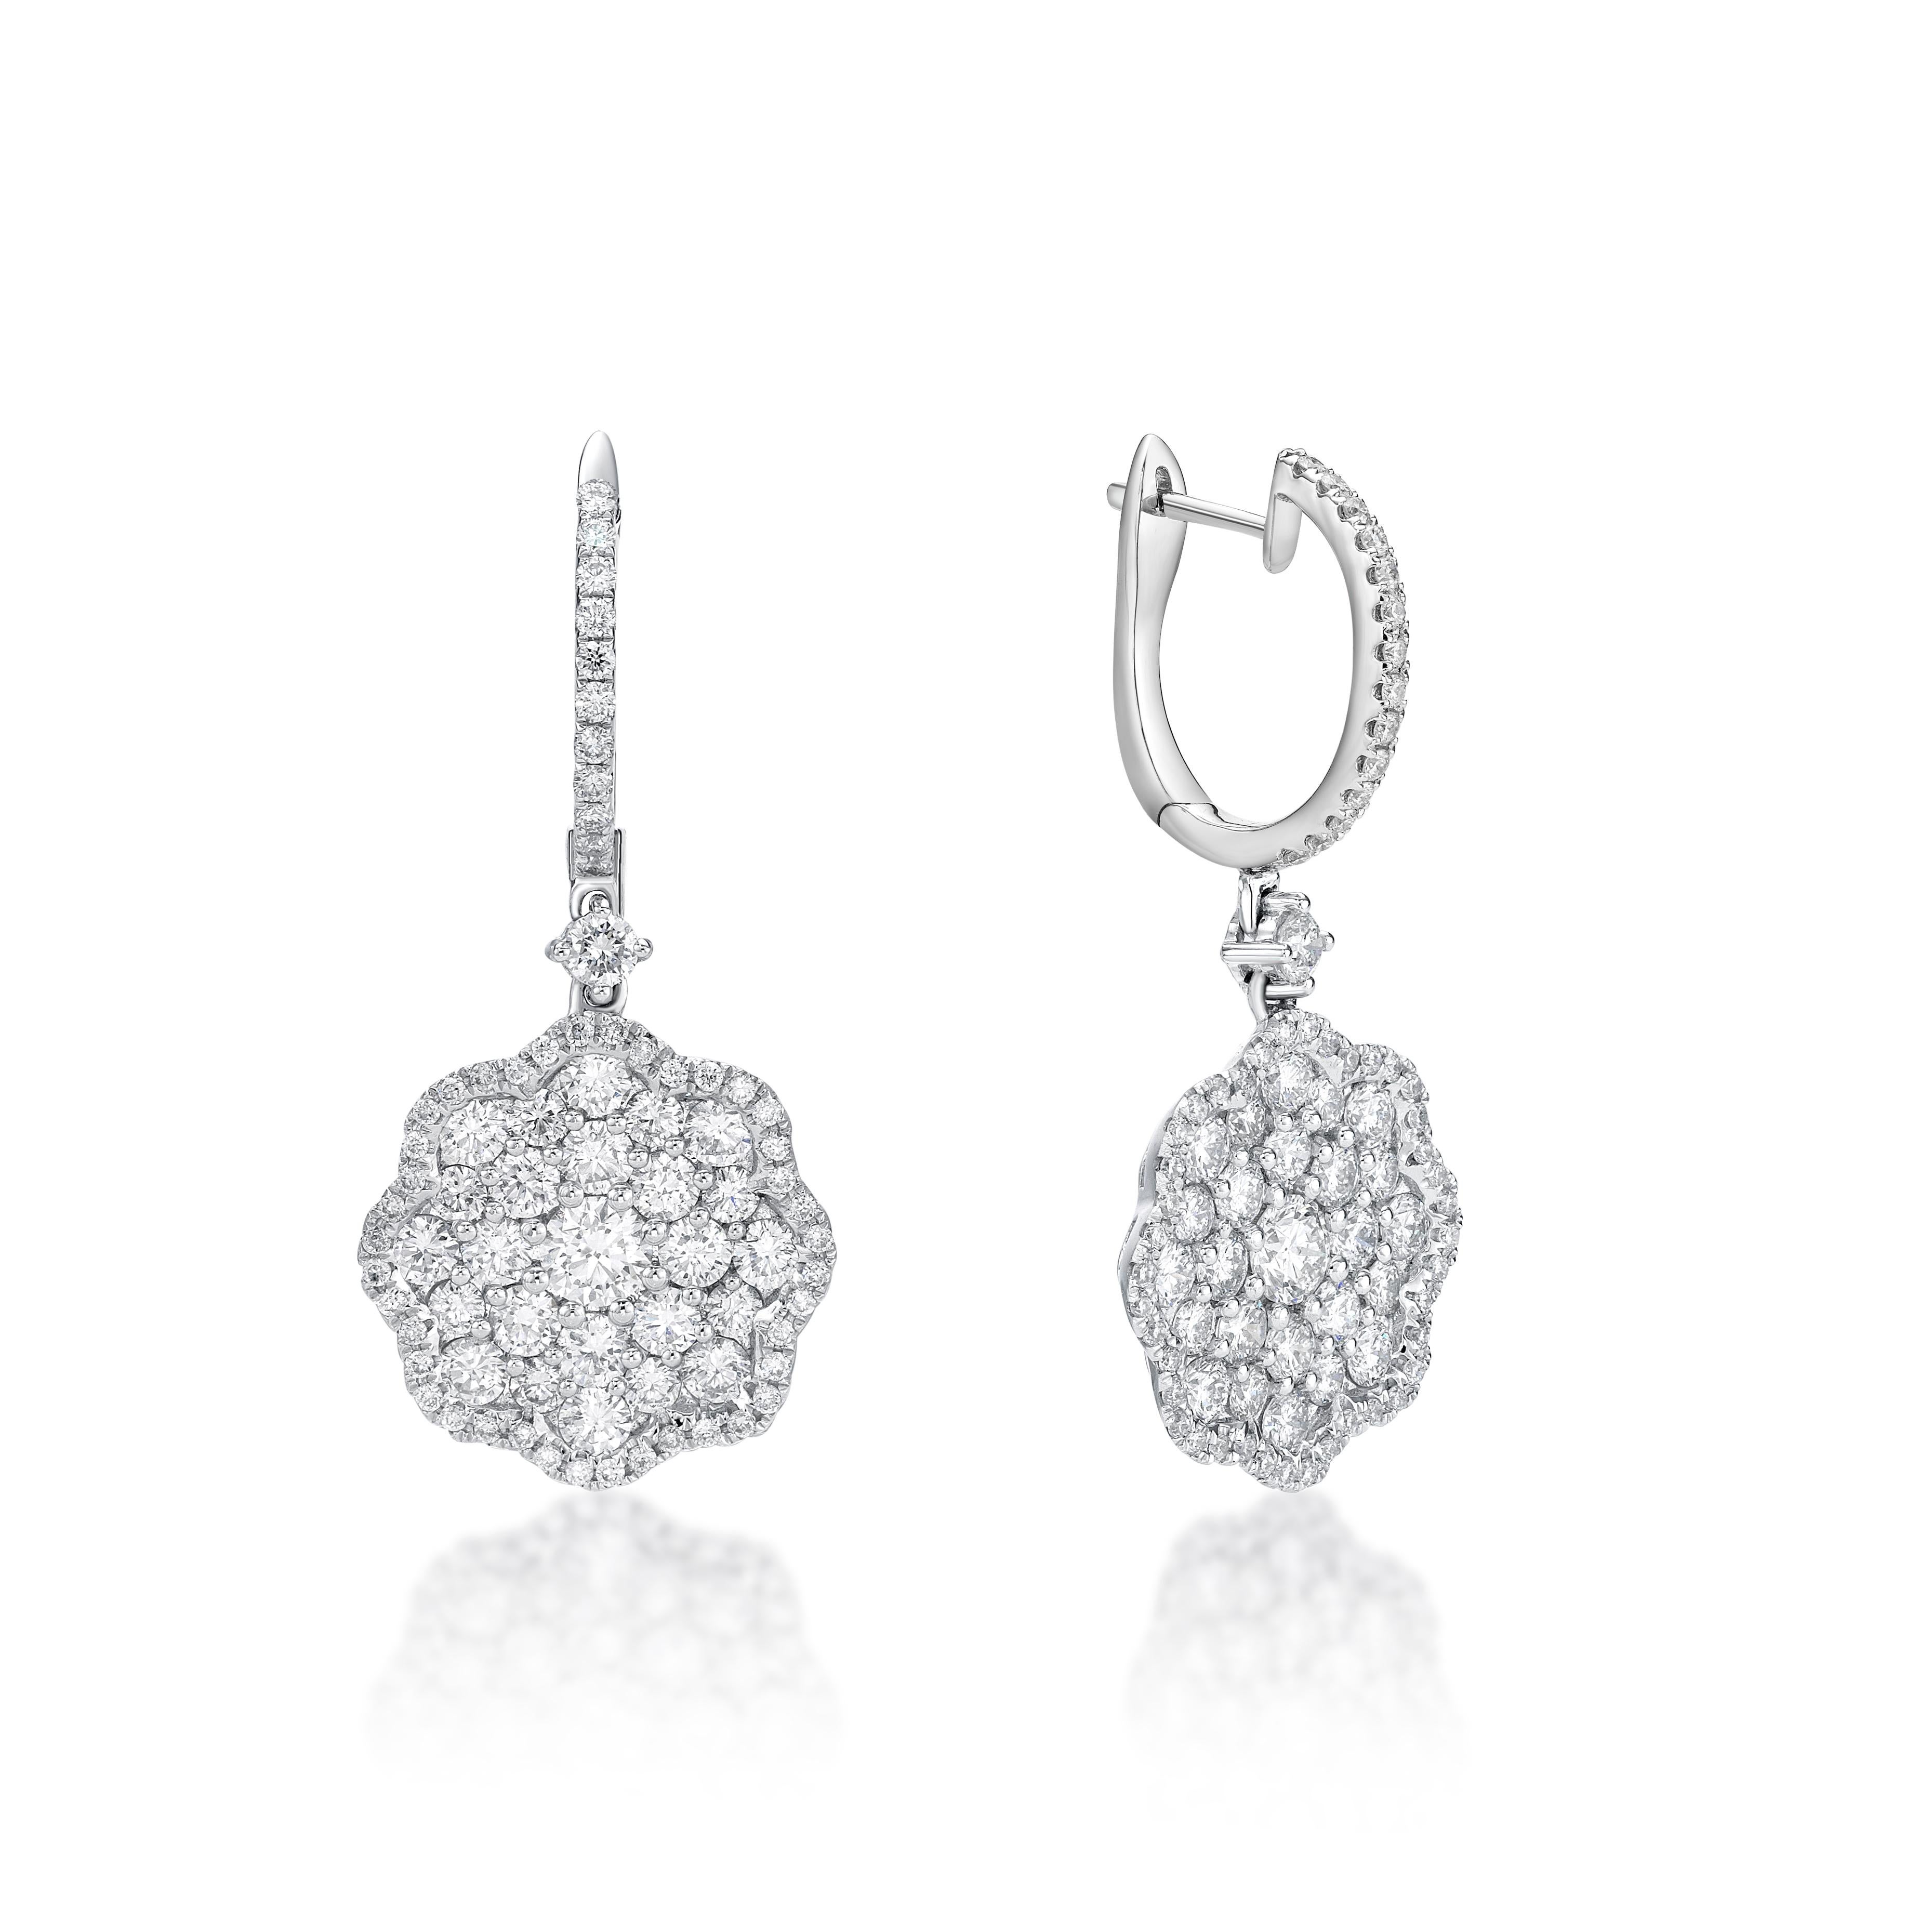 Diamonds are symbols of purity, unity, and love. They absorb and amplify energy, both positive and negative. They are also connected to the energy of wealth and are helpful in attracting abundance and manifesting.

The earring setting with 154 piece